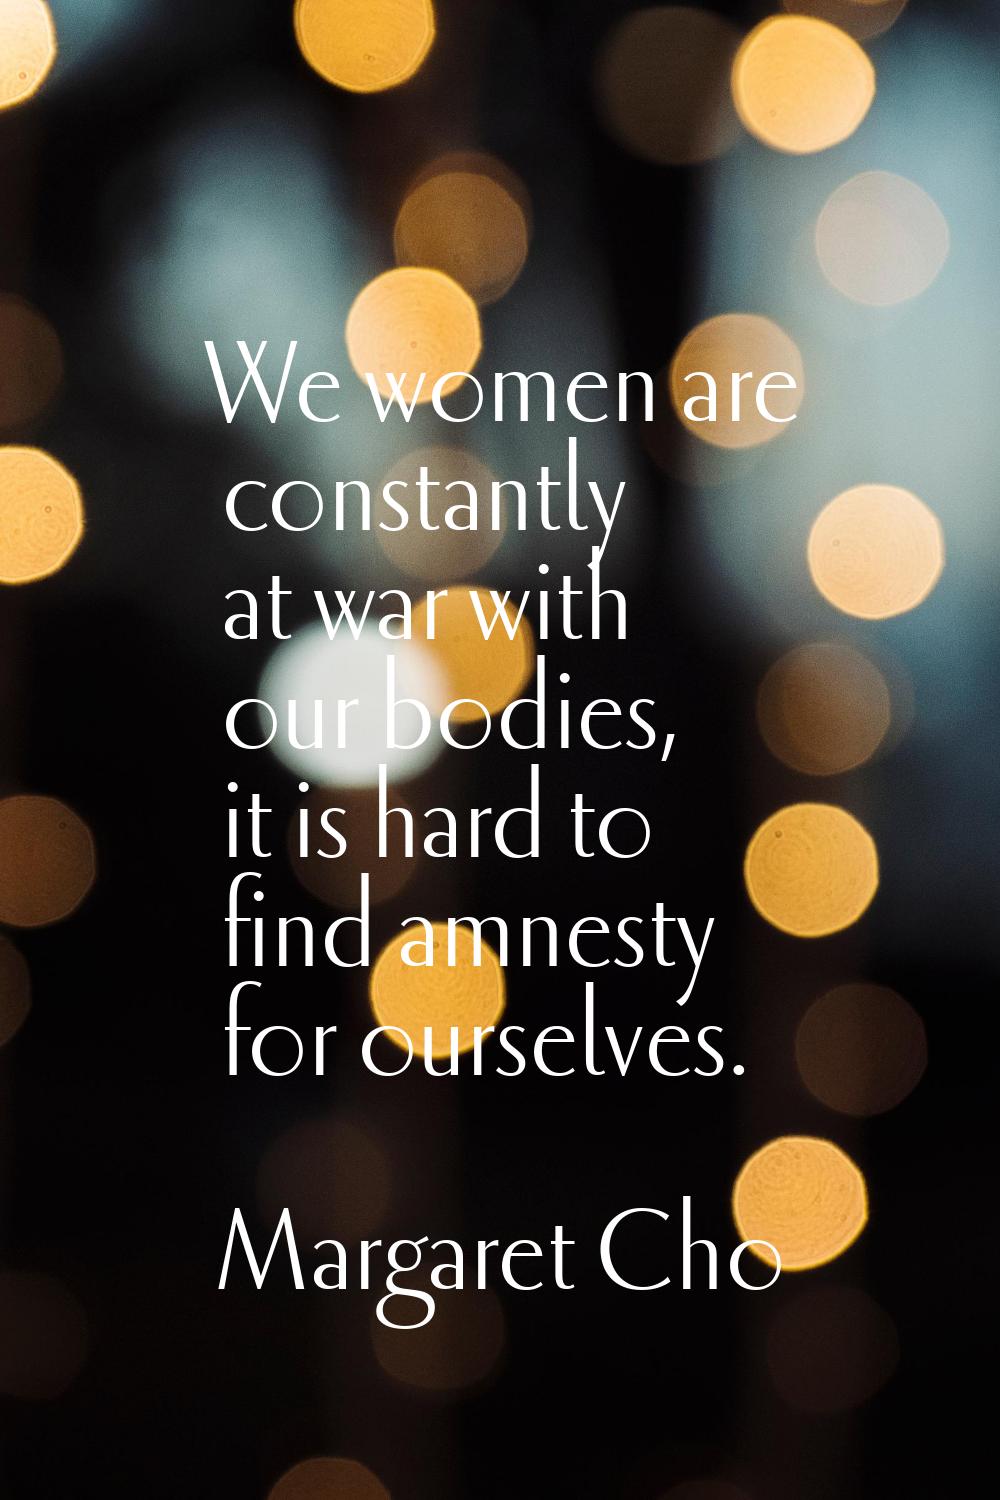 We women are constantly at war with our bodies, it is hard to find amnesty for ourselves.